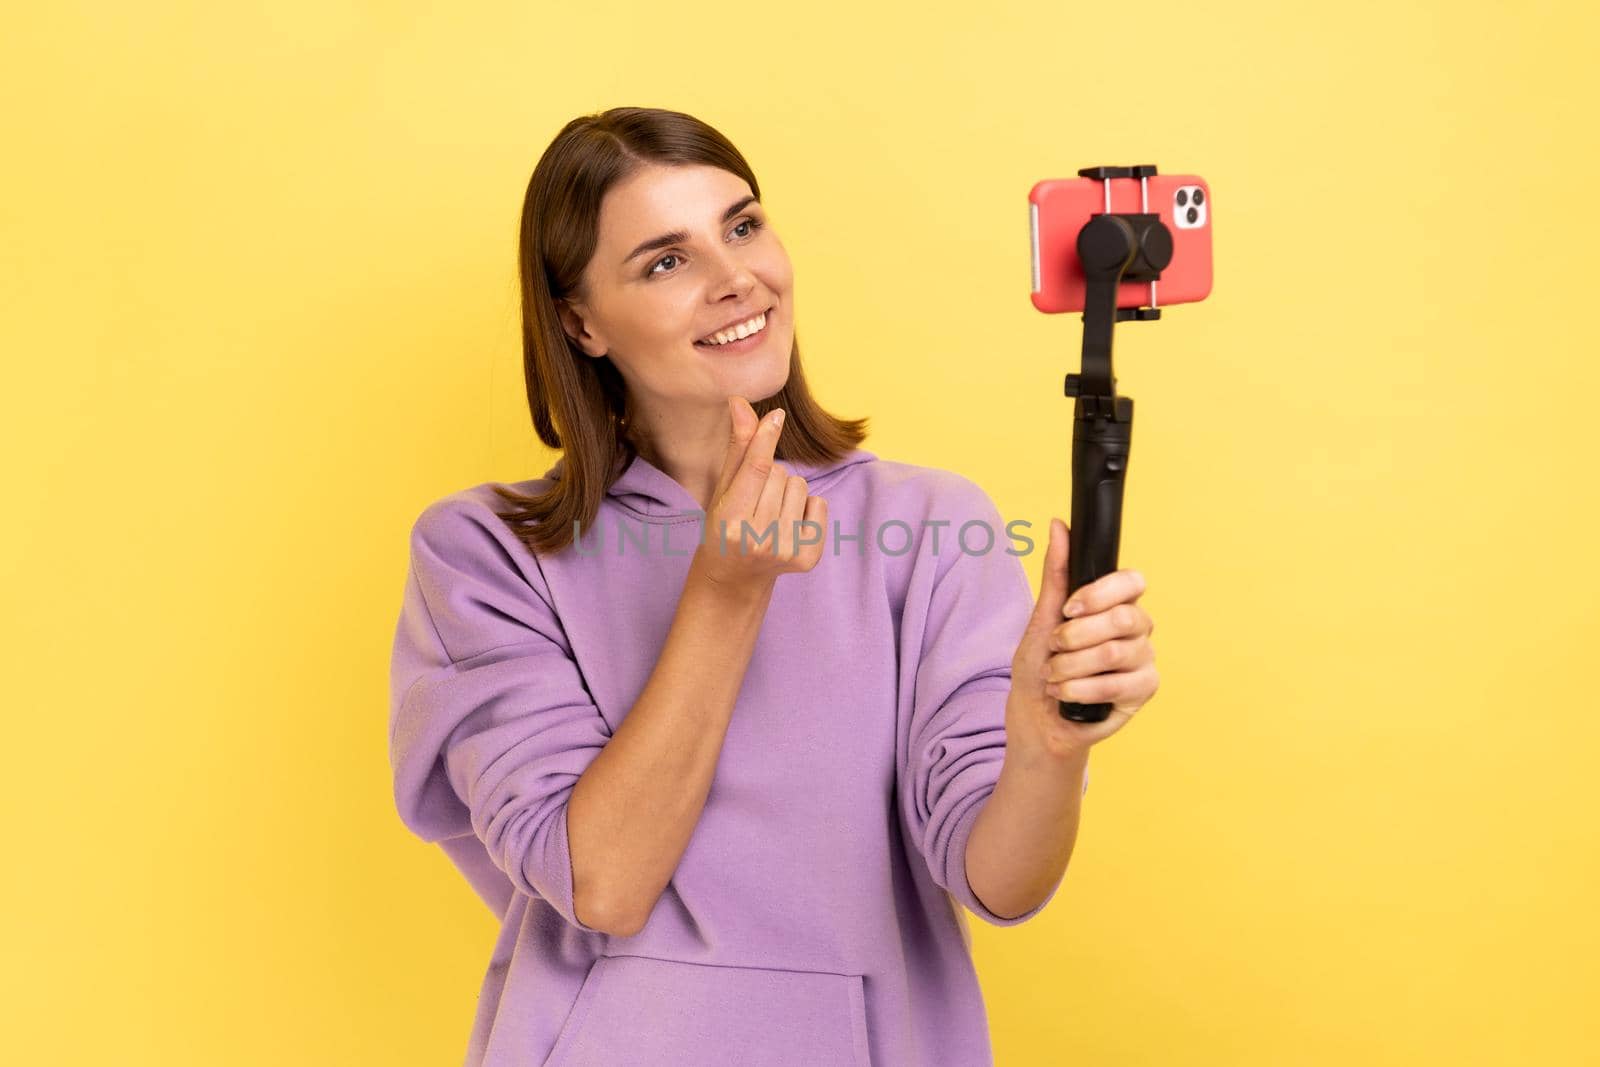 Optimistic woman using cell phone and steadicam for broadcasting livestream, showing korean finger heart sign, symbol of love, care, peace or support. Indoor studio shot isolated on yellow background.